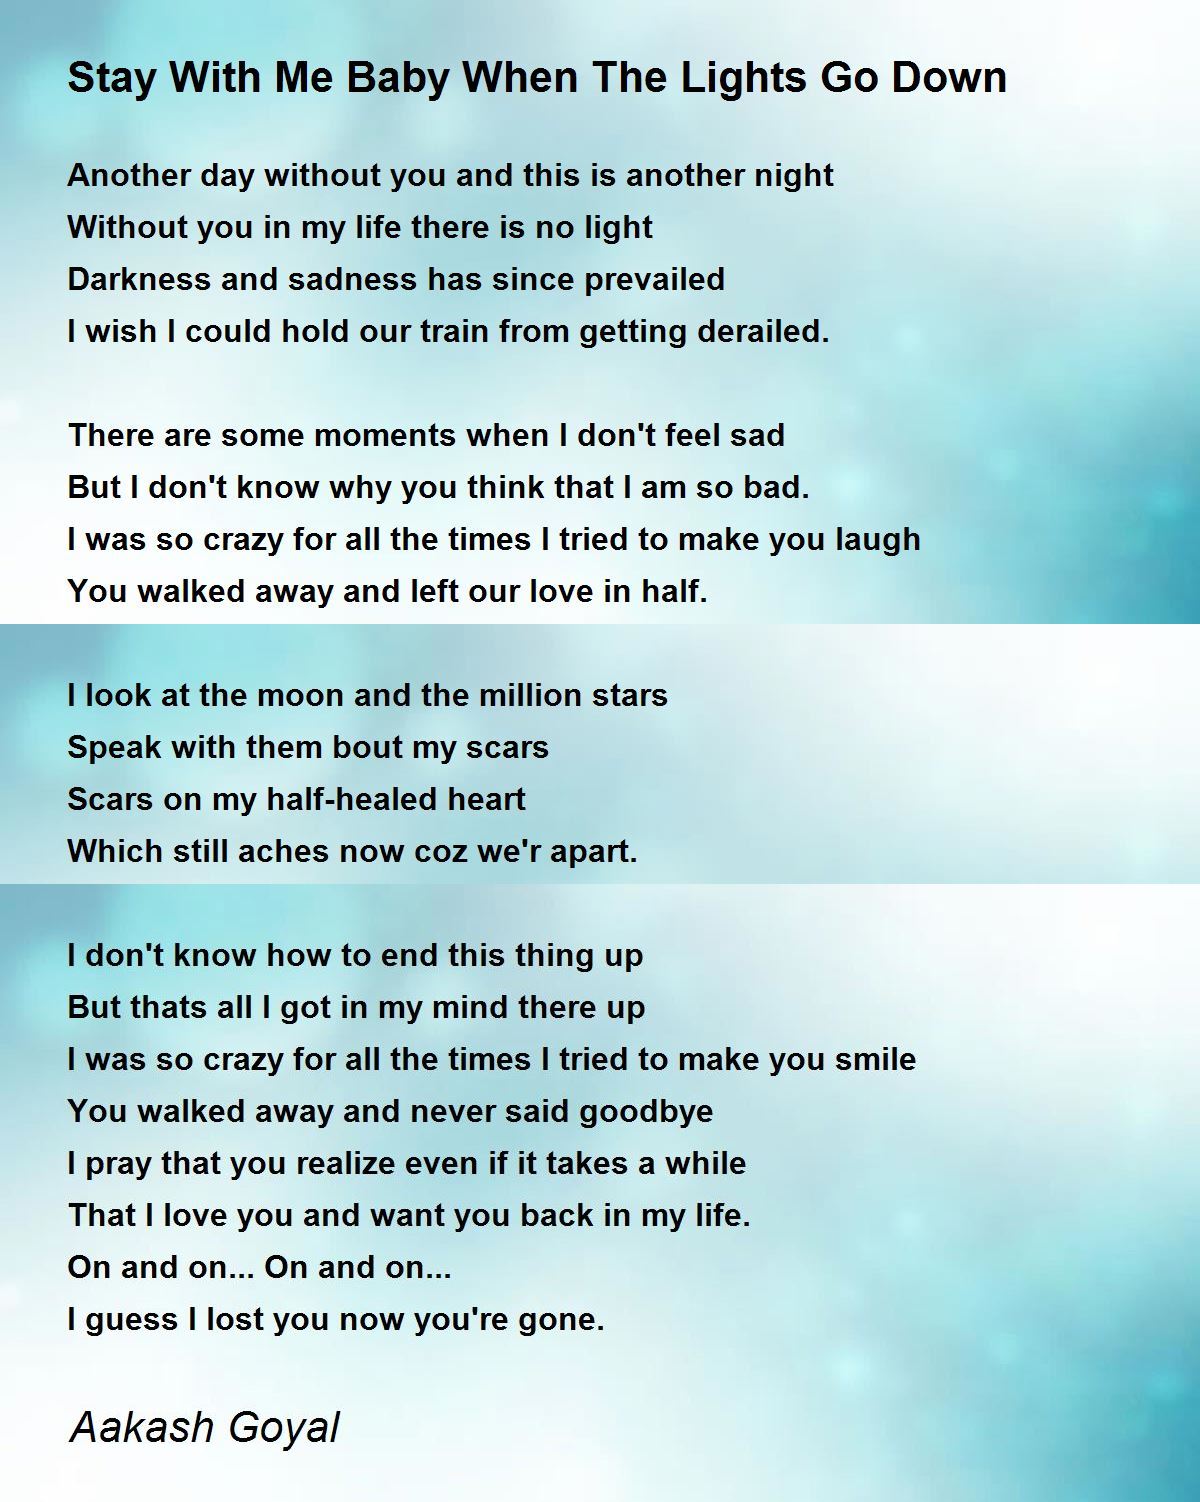 Stay With Me When The Lights Go Down by Goyal - Stay With Me Baby When The Lights Go Down Poem